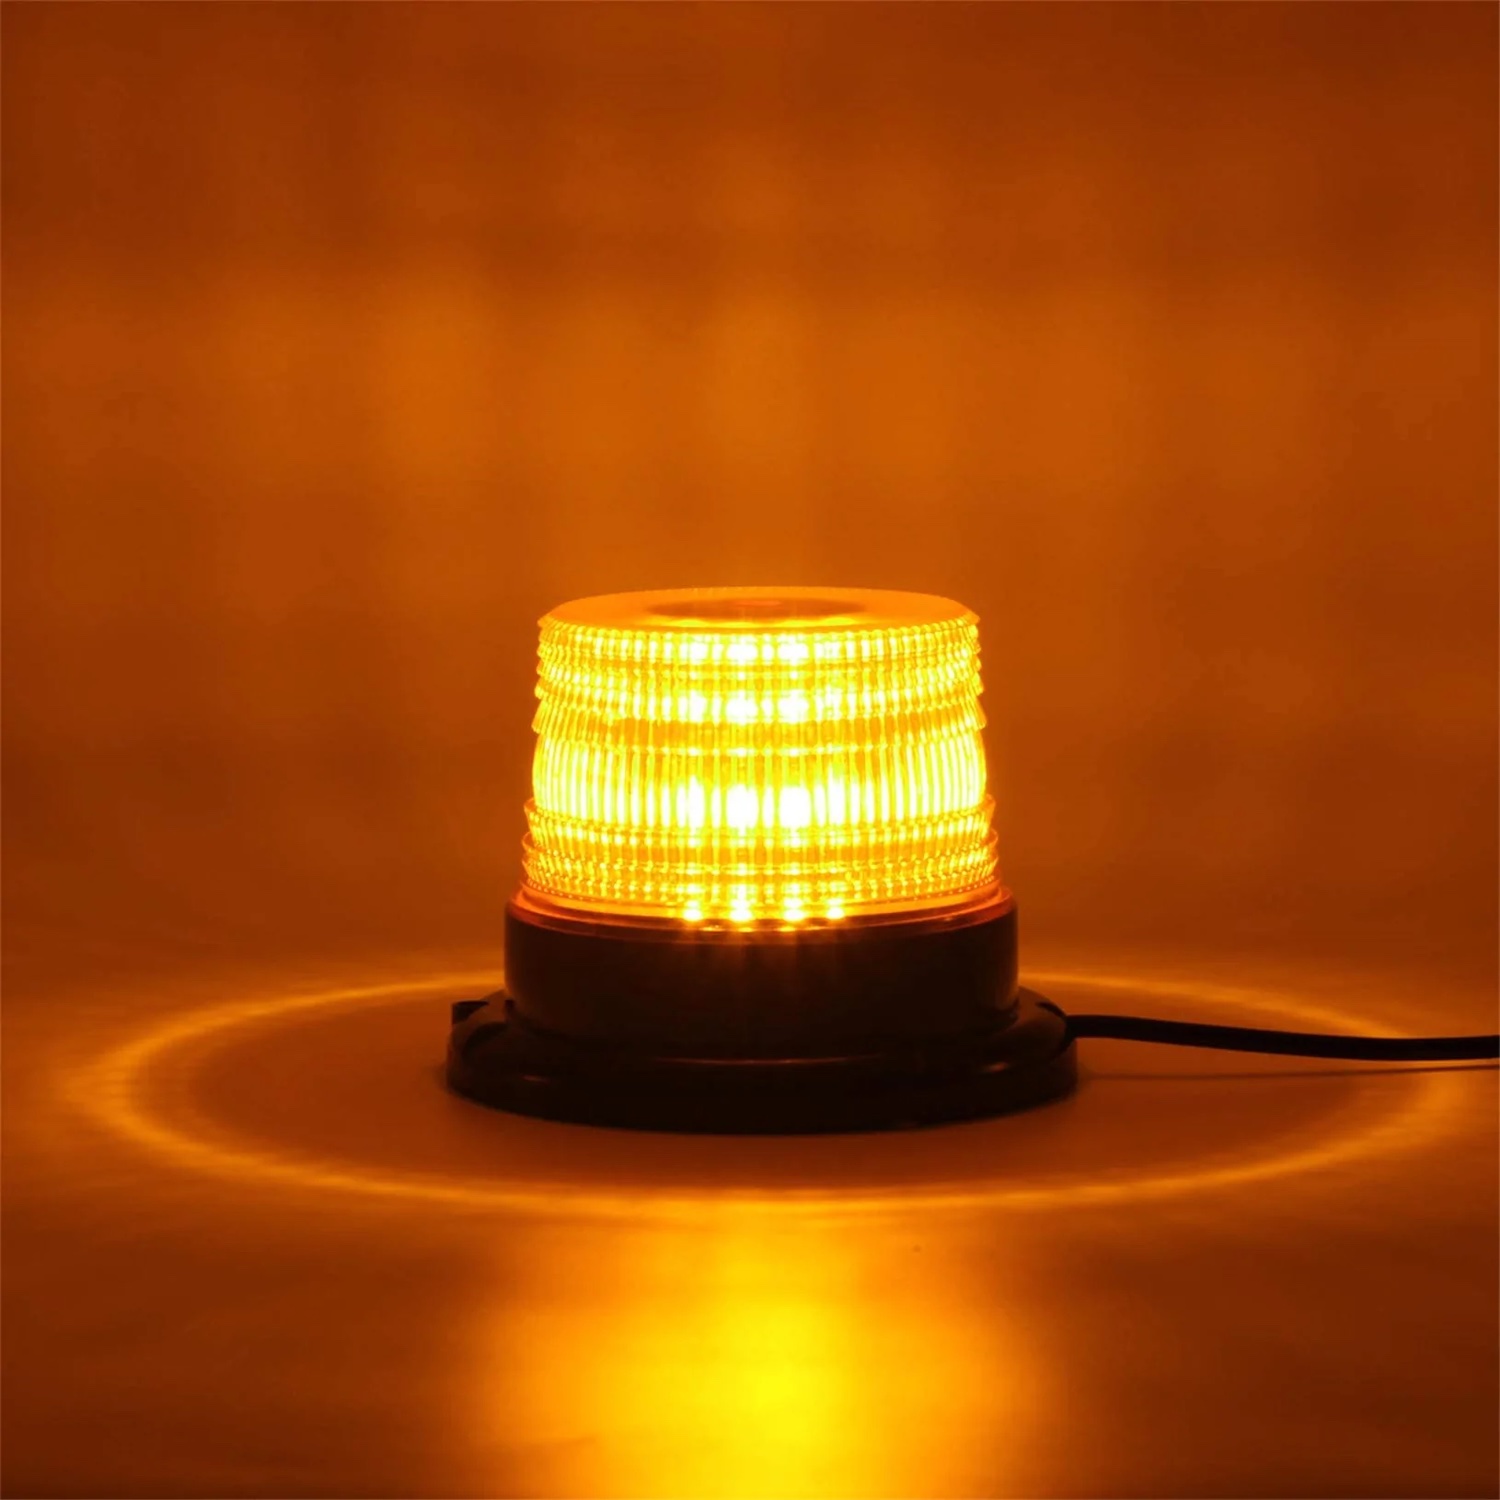 Product photo of a flashing yellow or amber emergency light.